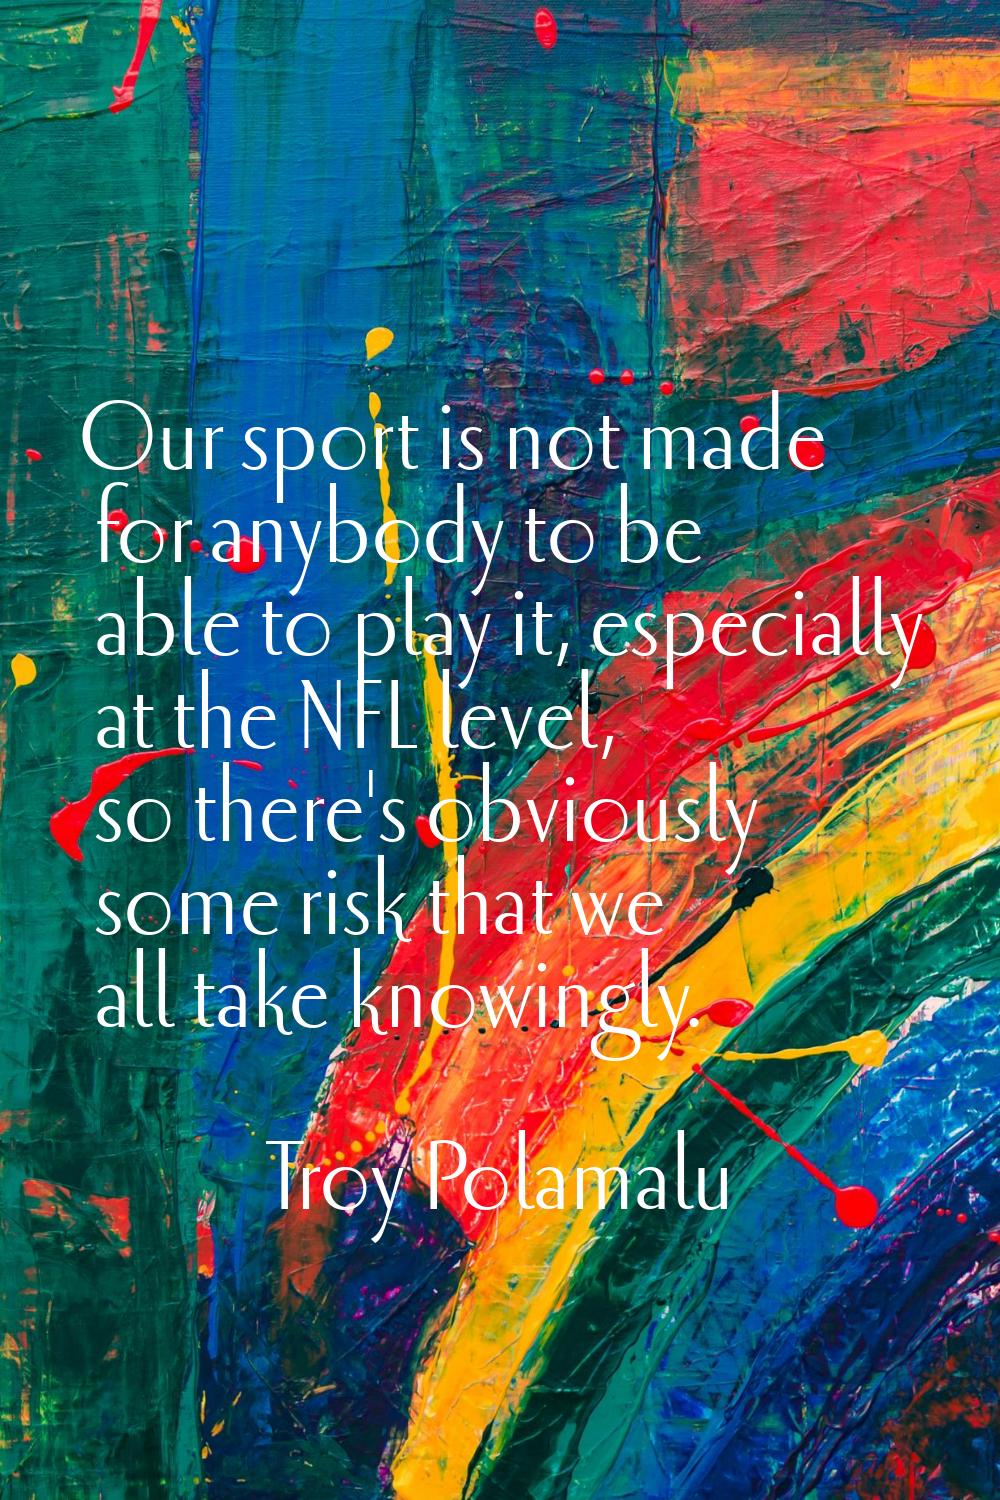 Our sport is not made for anybody to be able to play it, especially at the NFL level, so there's ob